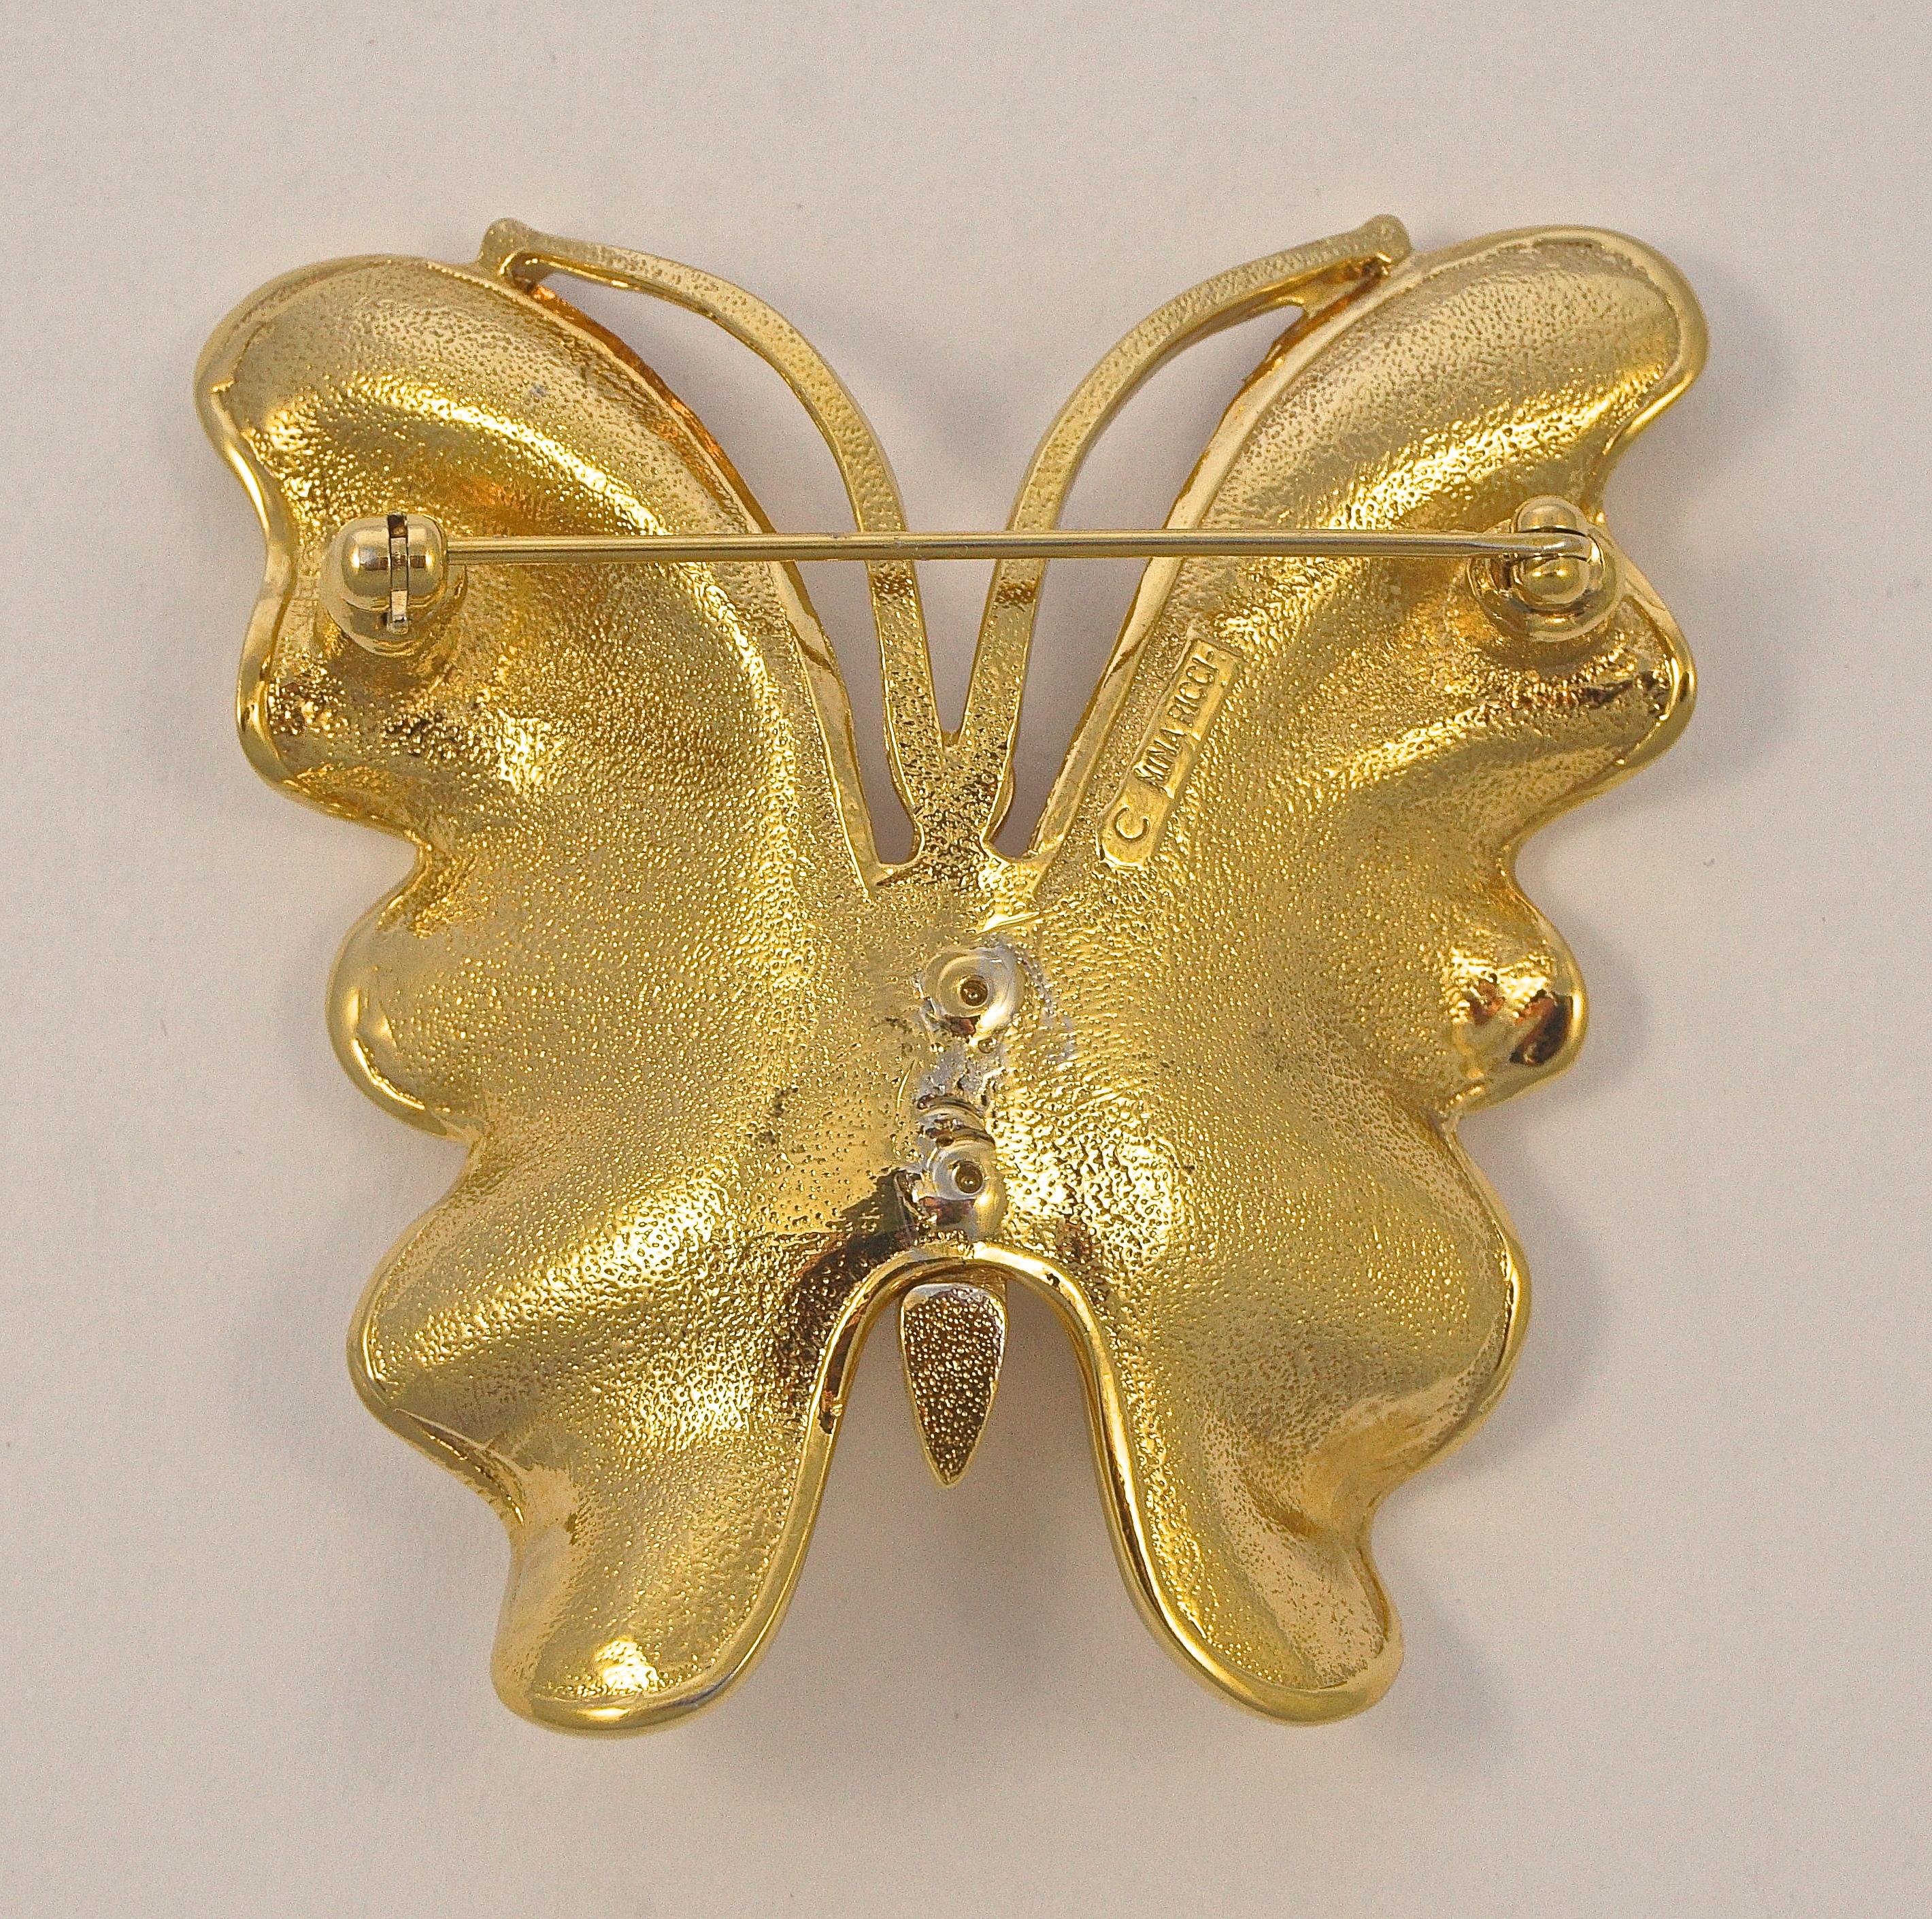 Fabulous Nina Ricci large gold plated shiny butterfly brooch, the back is textured. Measuring length 5.3cm / 2.08 inches by width 5.2cm / 2.05 inches. There is some scratching to the gold plate. Circa 1980s.

This beautiful and quality designer